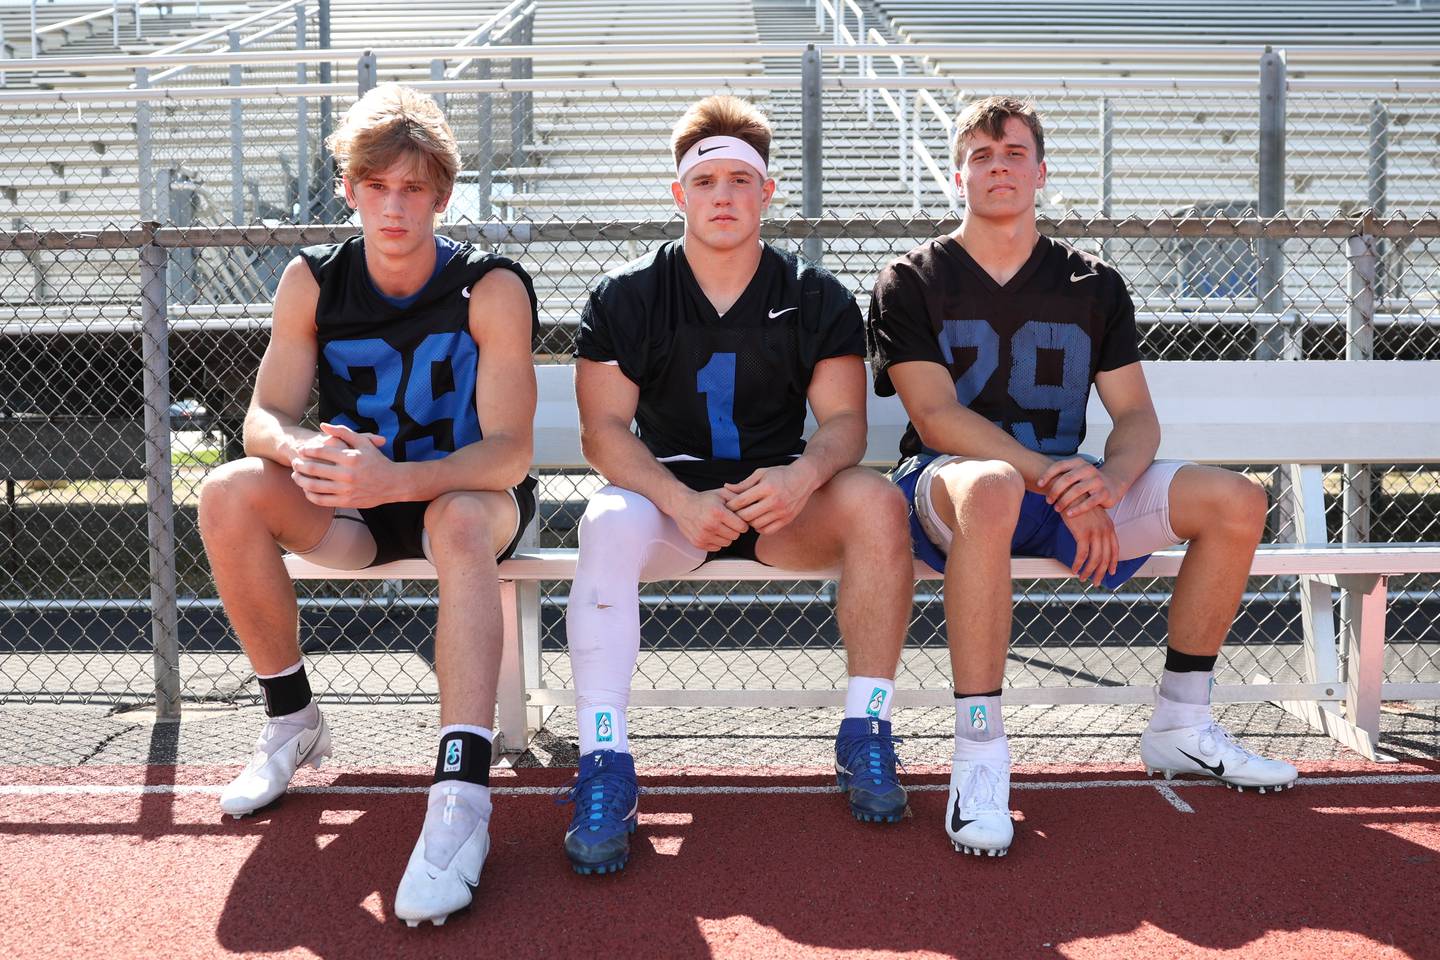 Lincoln-Way East’s Jake Scianna, 1, will command the defense with the talents of defensive lineman Caden O’Rourke, 39, and defensive back DJ Ritter, 29. Tuesday, Aug. 9, 2022, in Frankfort.